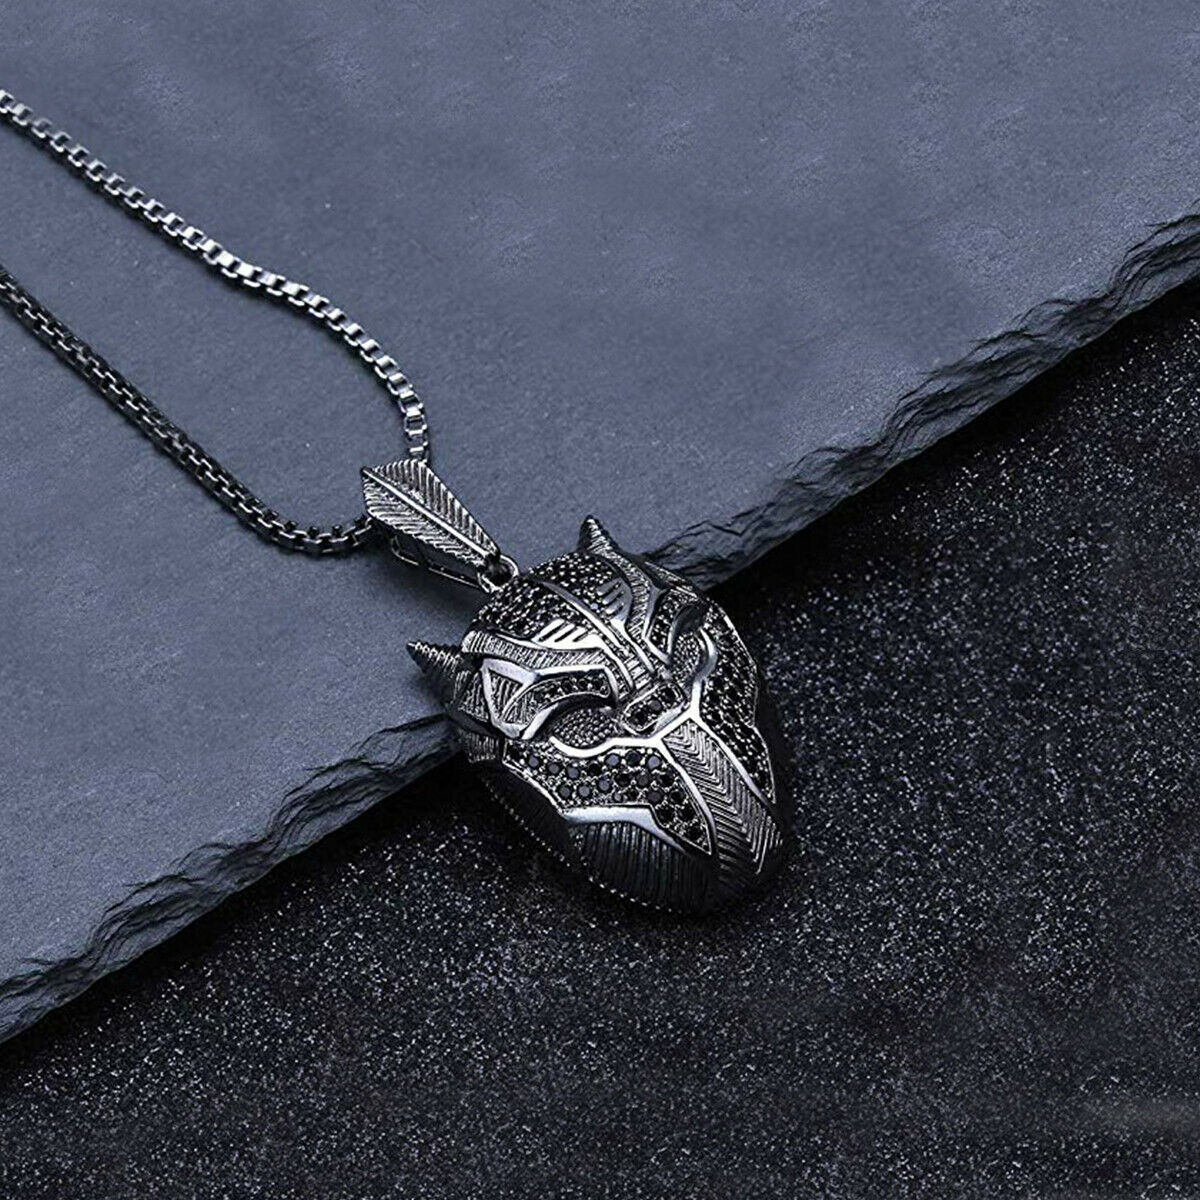 Unbranded - Mens black stainless steel lion head pendant necklace with silver tone chain 22